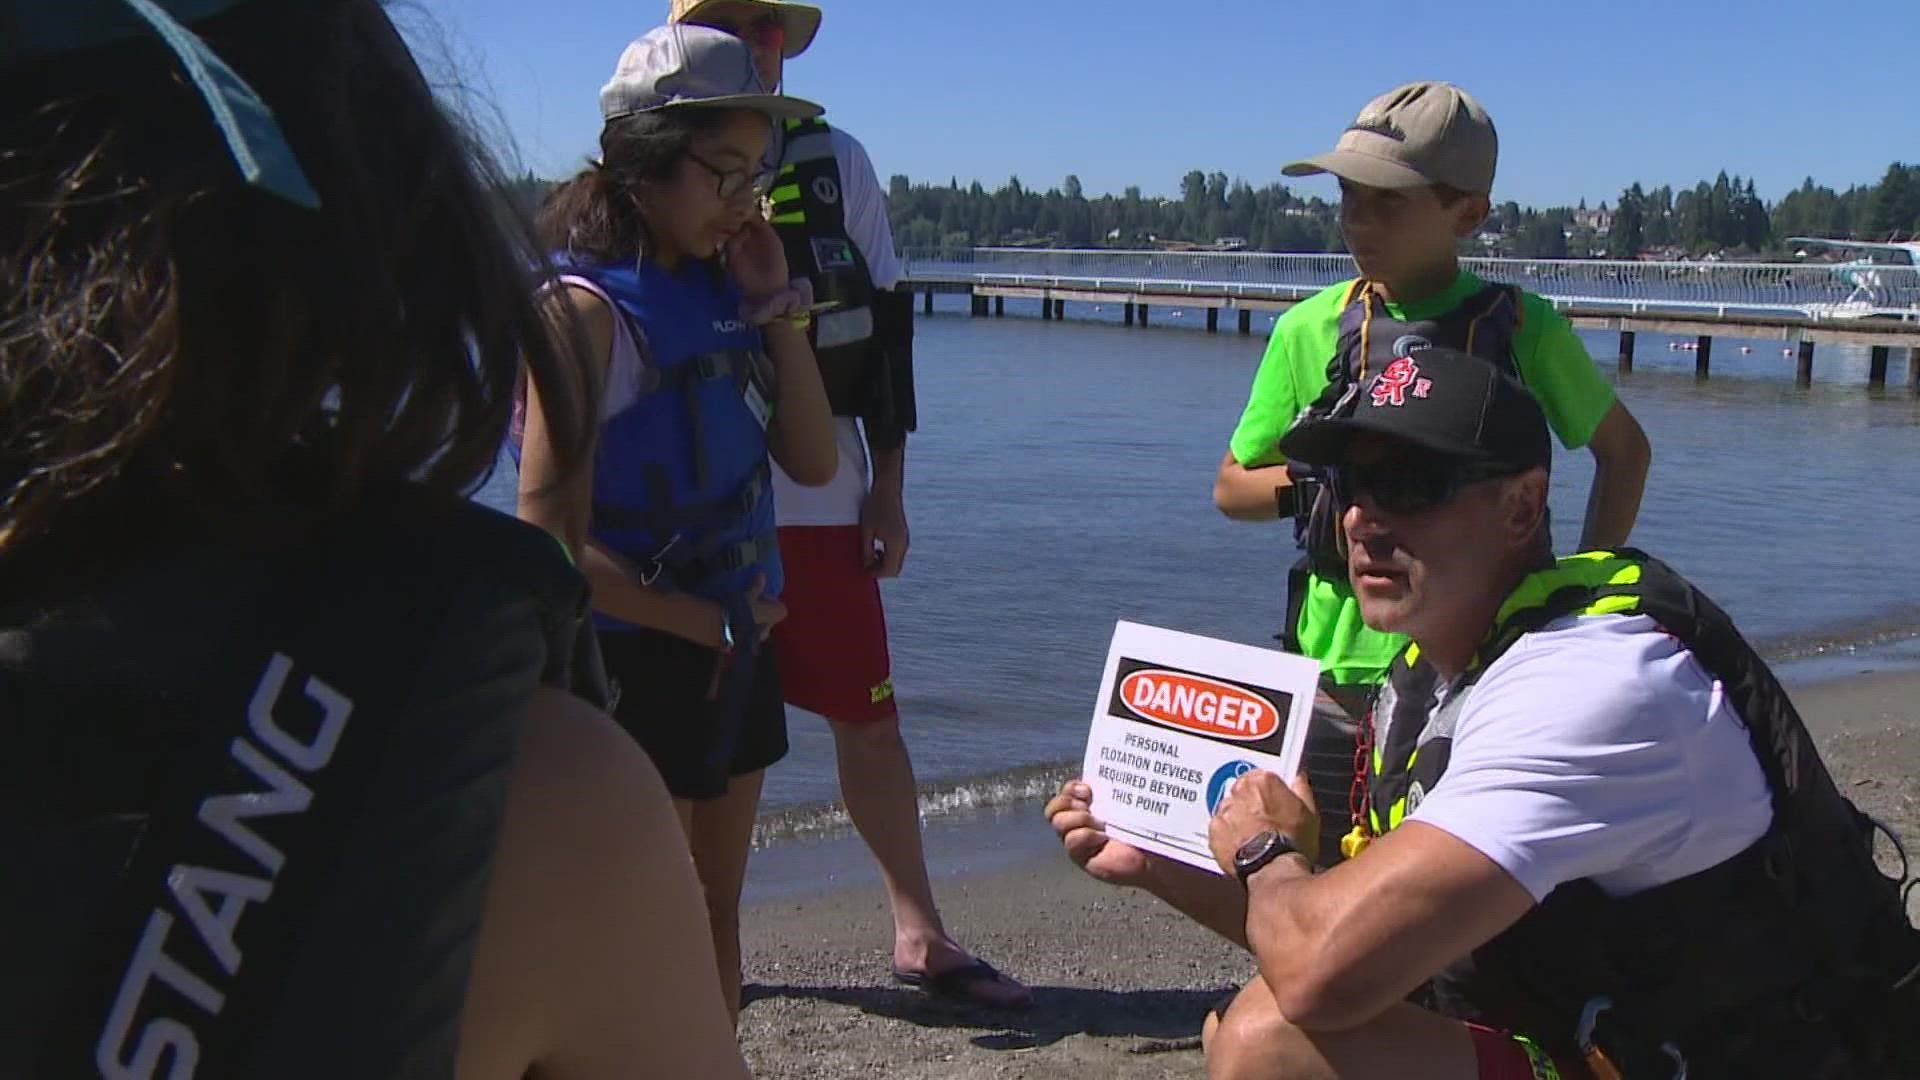 A water safety camp is teaching kids rescue techniques and "situational awareness."